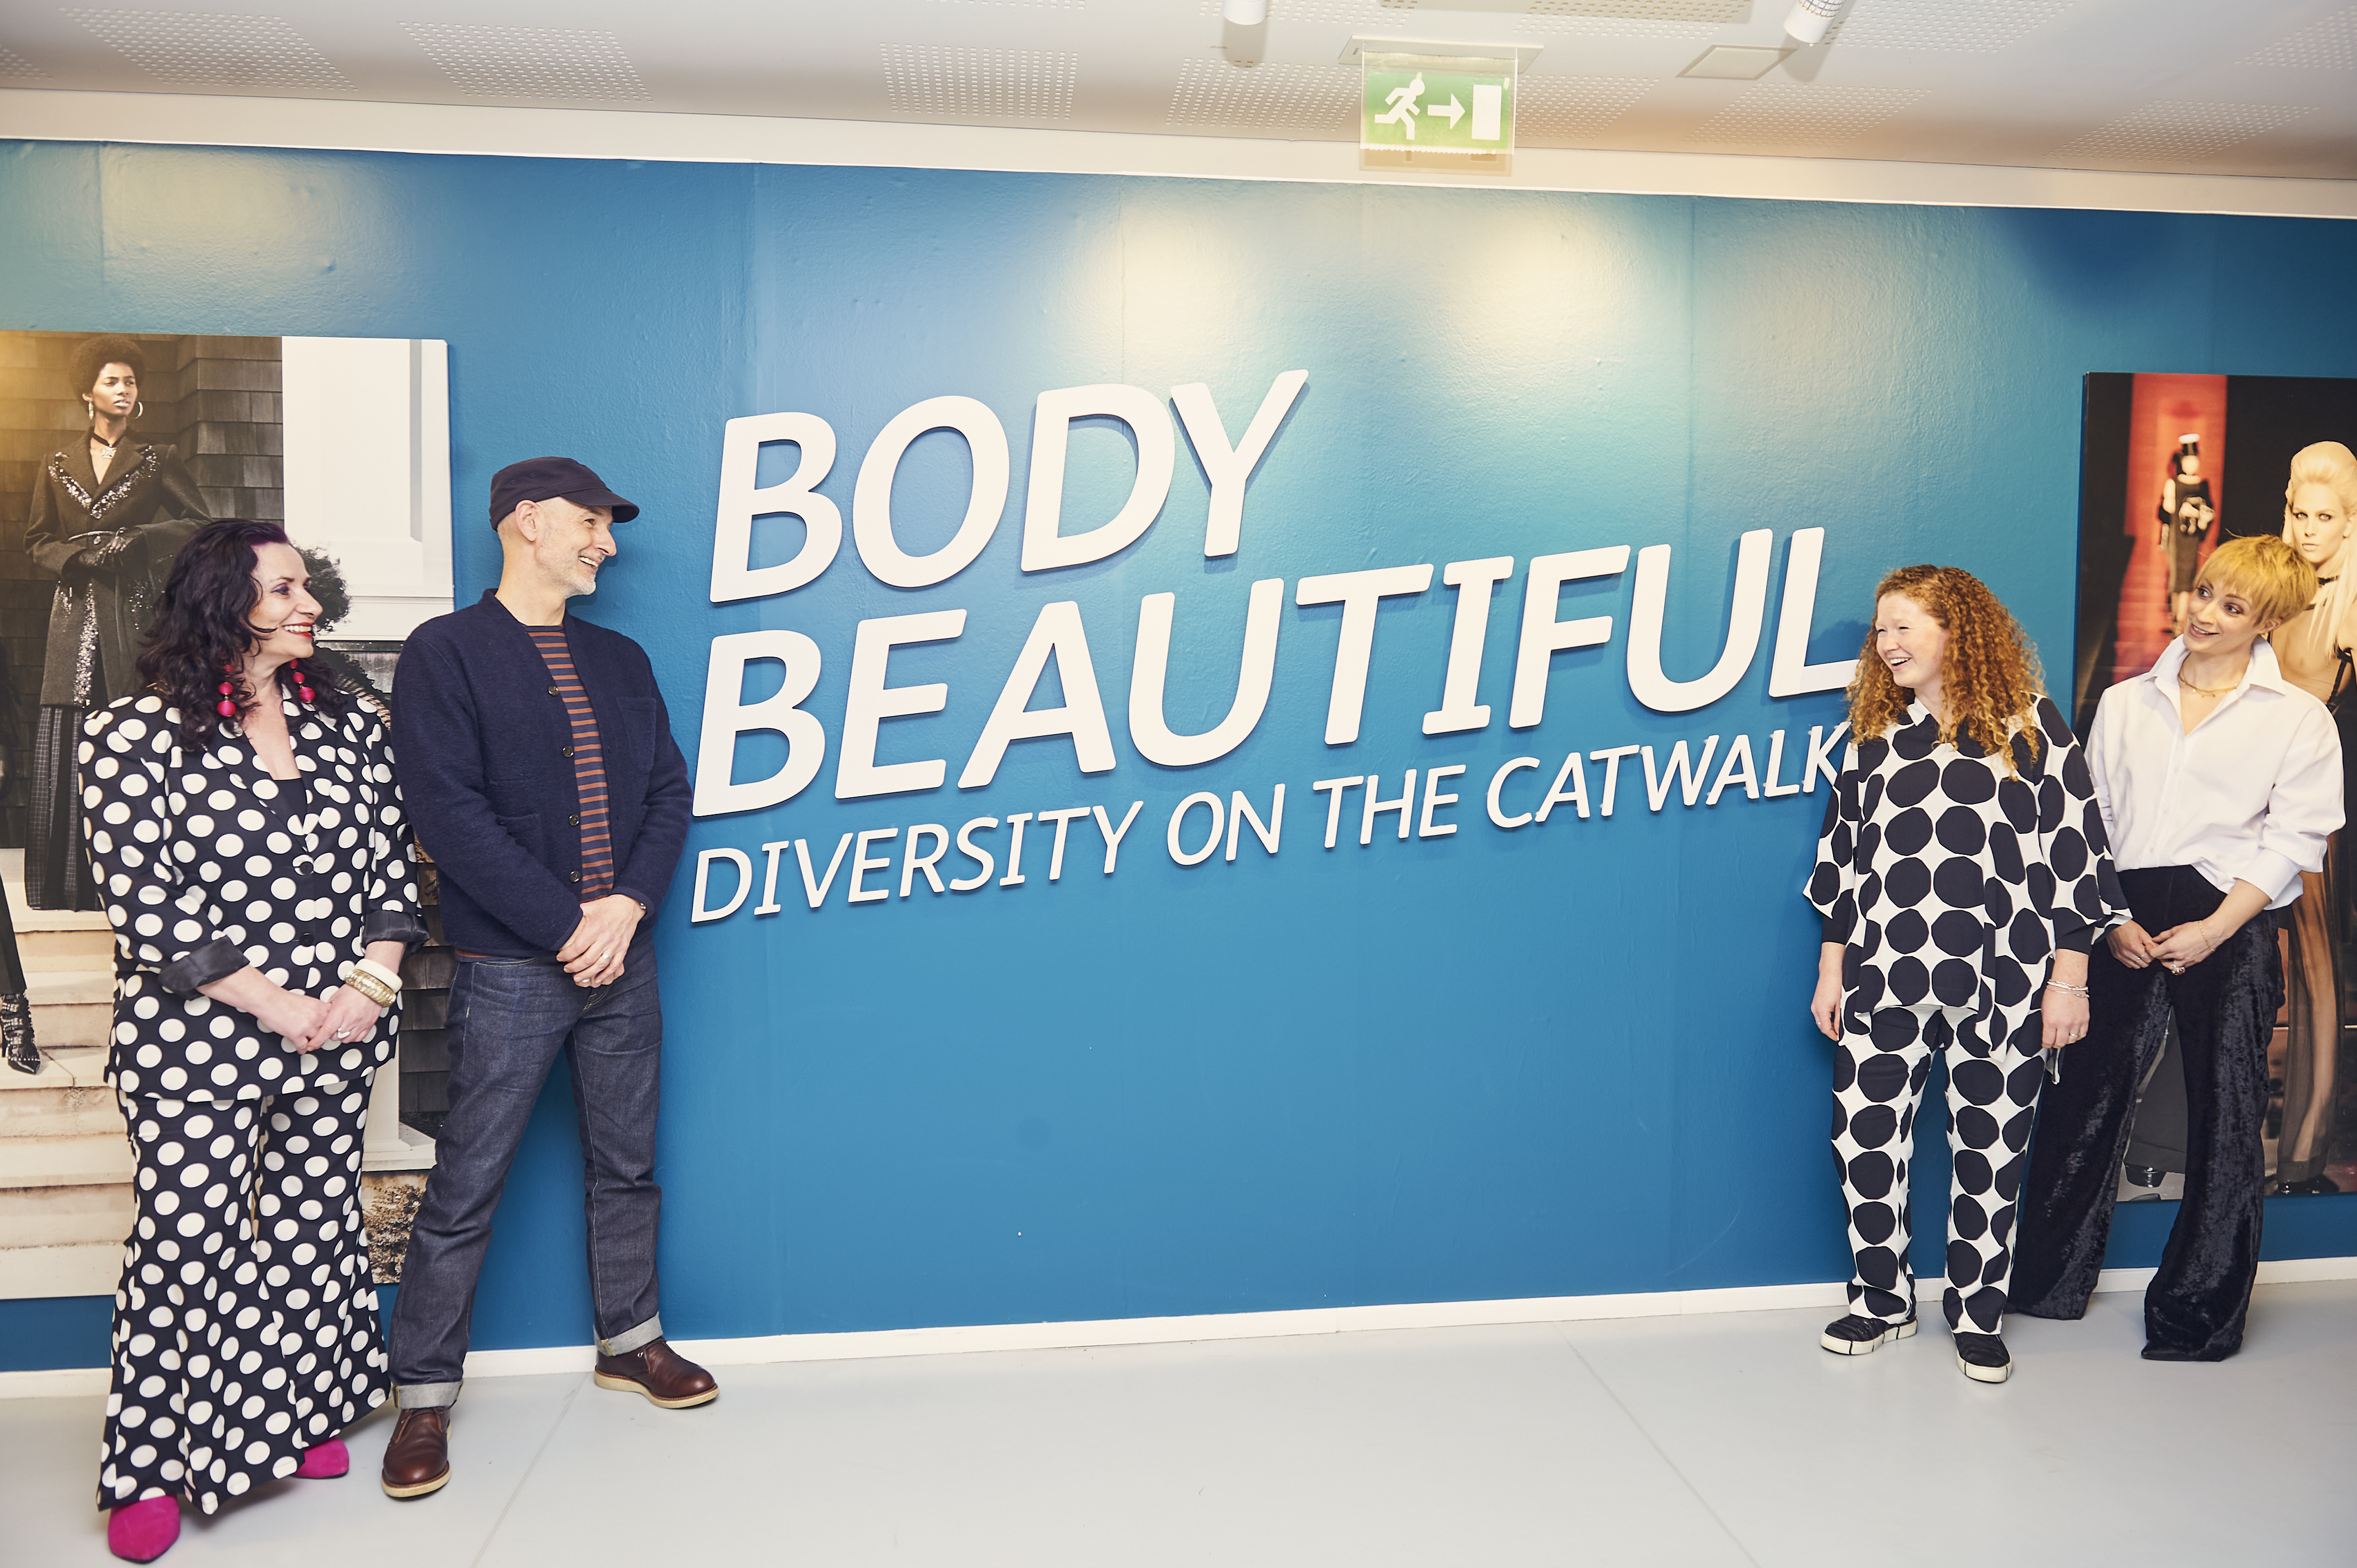 Four people pose alongside exhibition title on large wall - Body Beautiful, Diversity on the Catwalk.